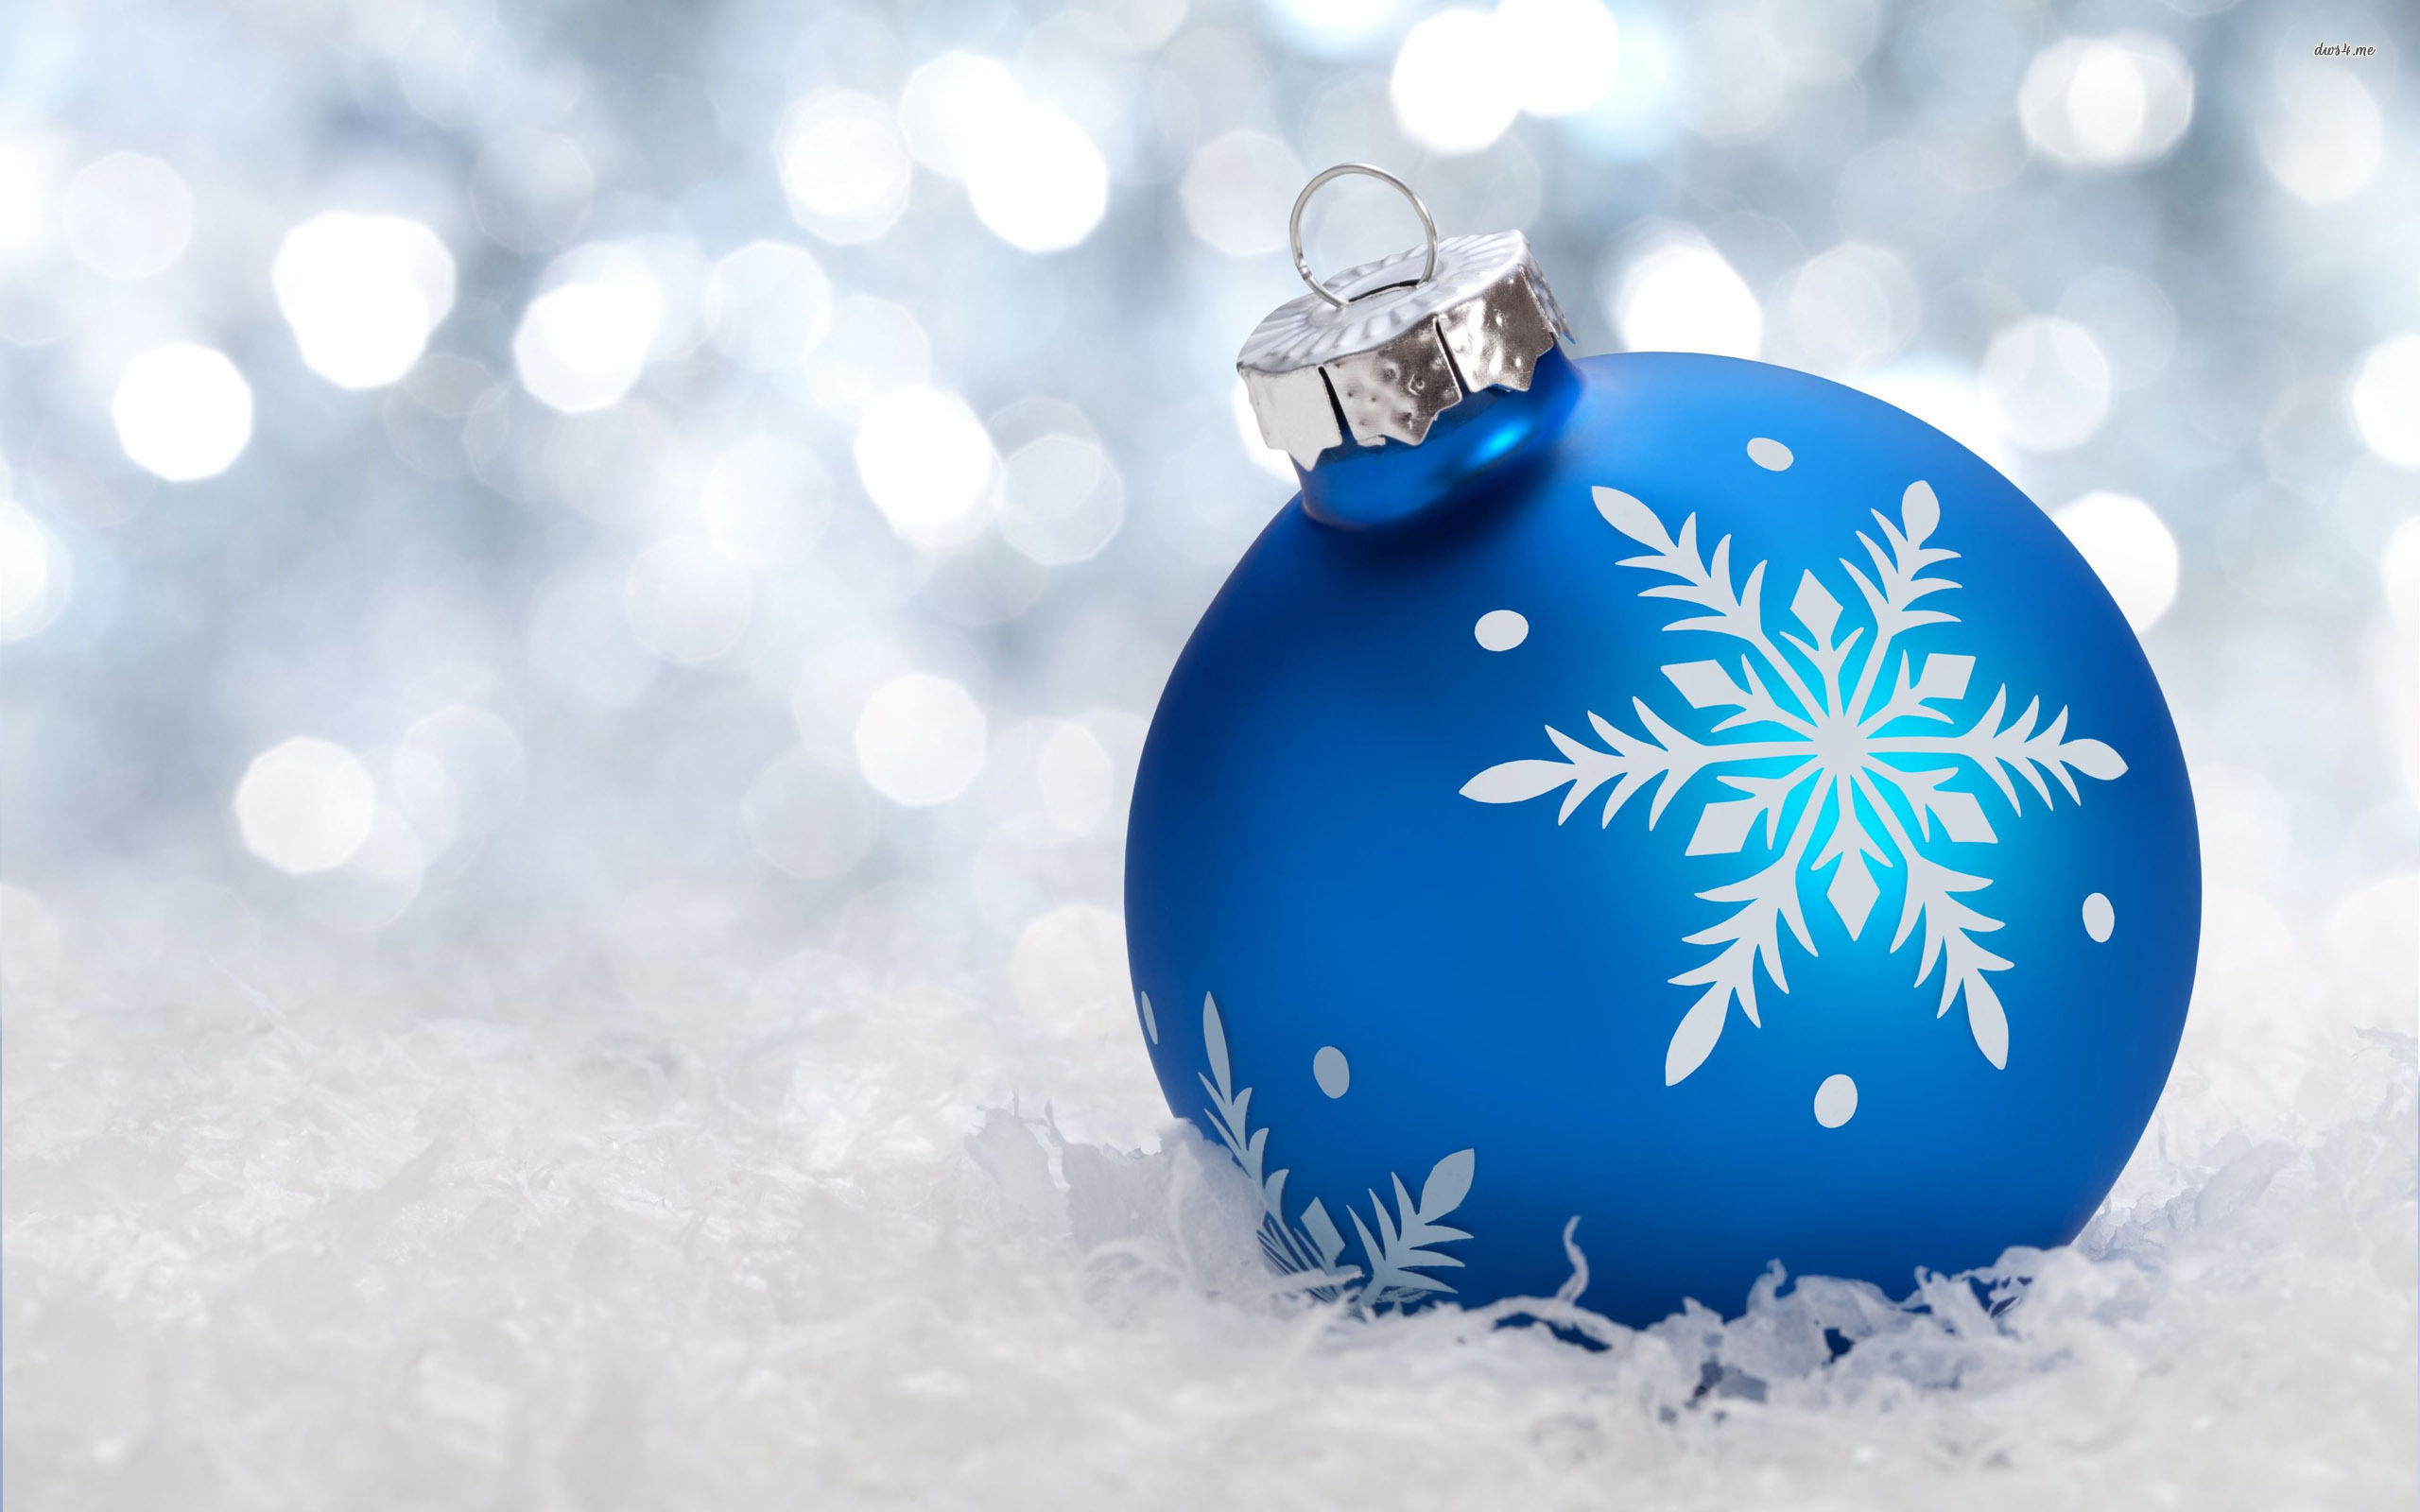 Blue Christmas bauble on snow wallpaper - Holiday wallpapers - #45523